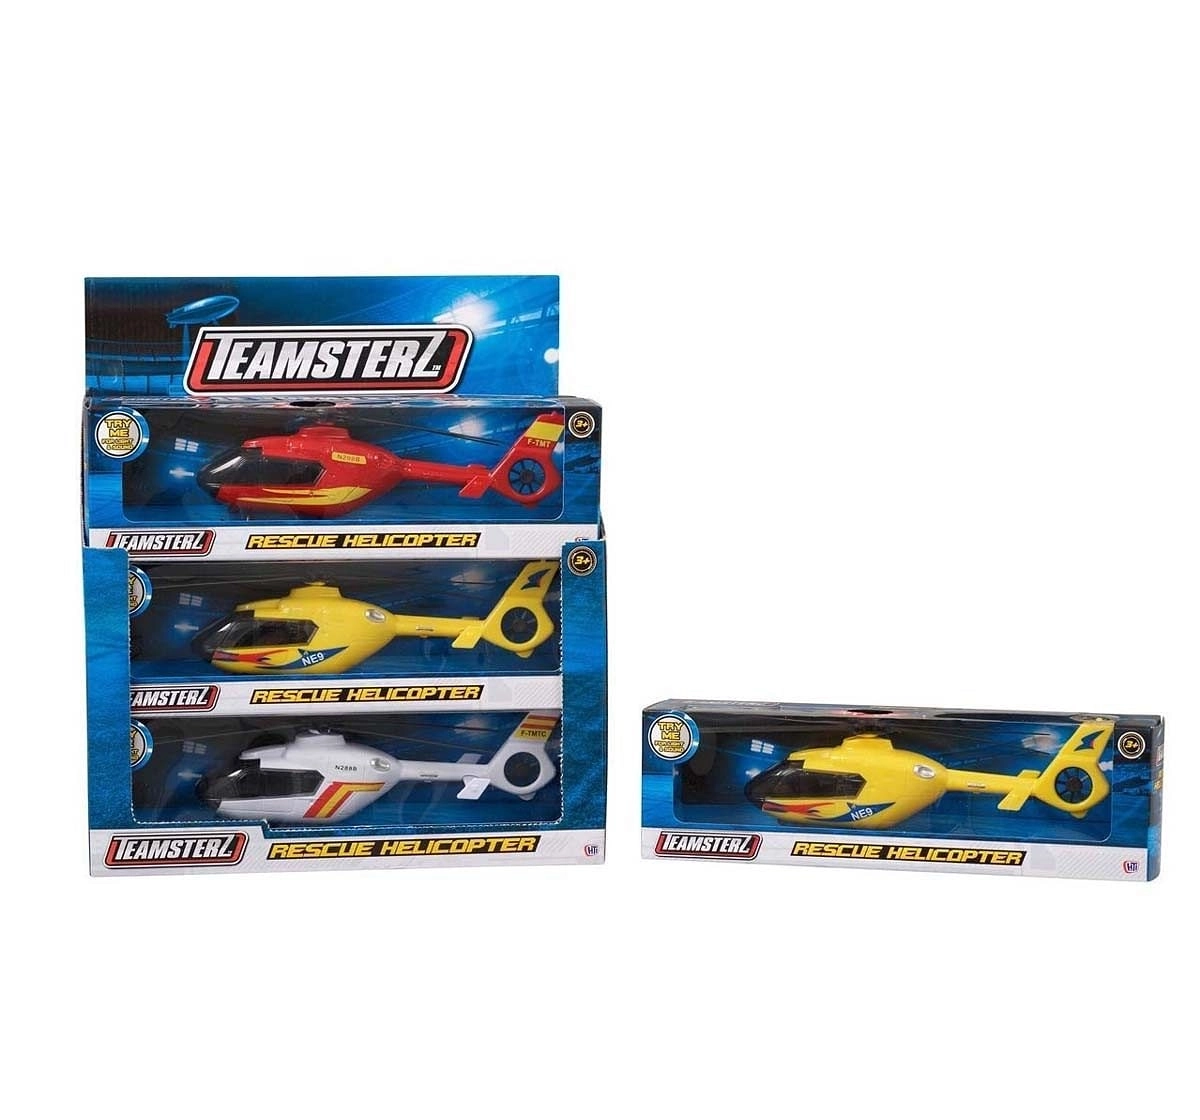 Hti Teamsterz Childrens Toy Helicopter 3 Colours Realistic Sound Free Moving Propellers Vehicles for Kids age 3Y+ 